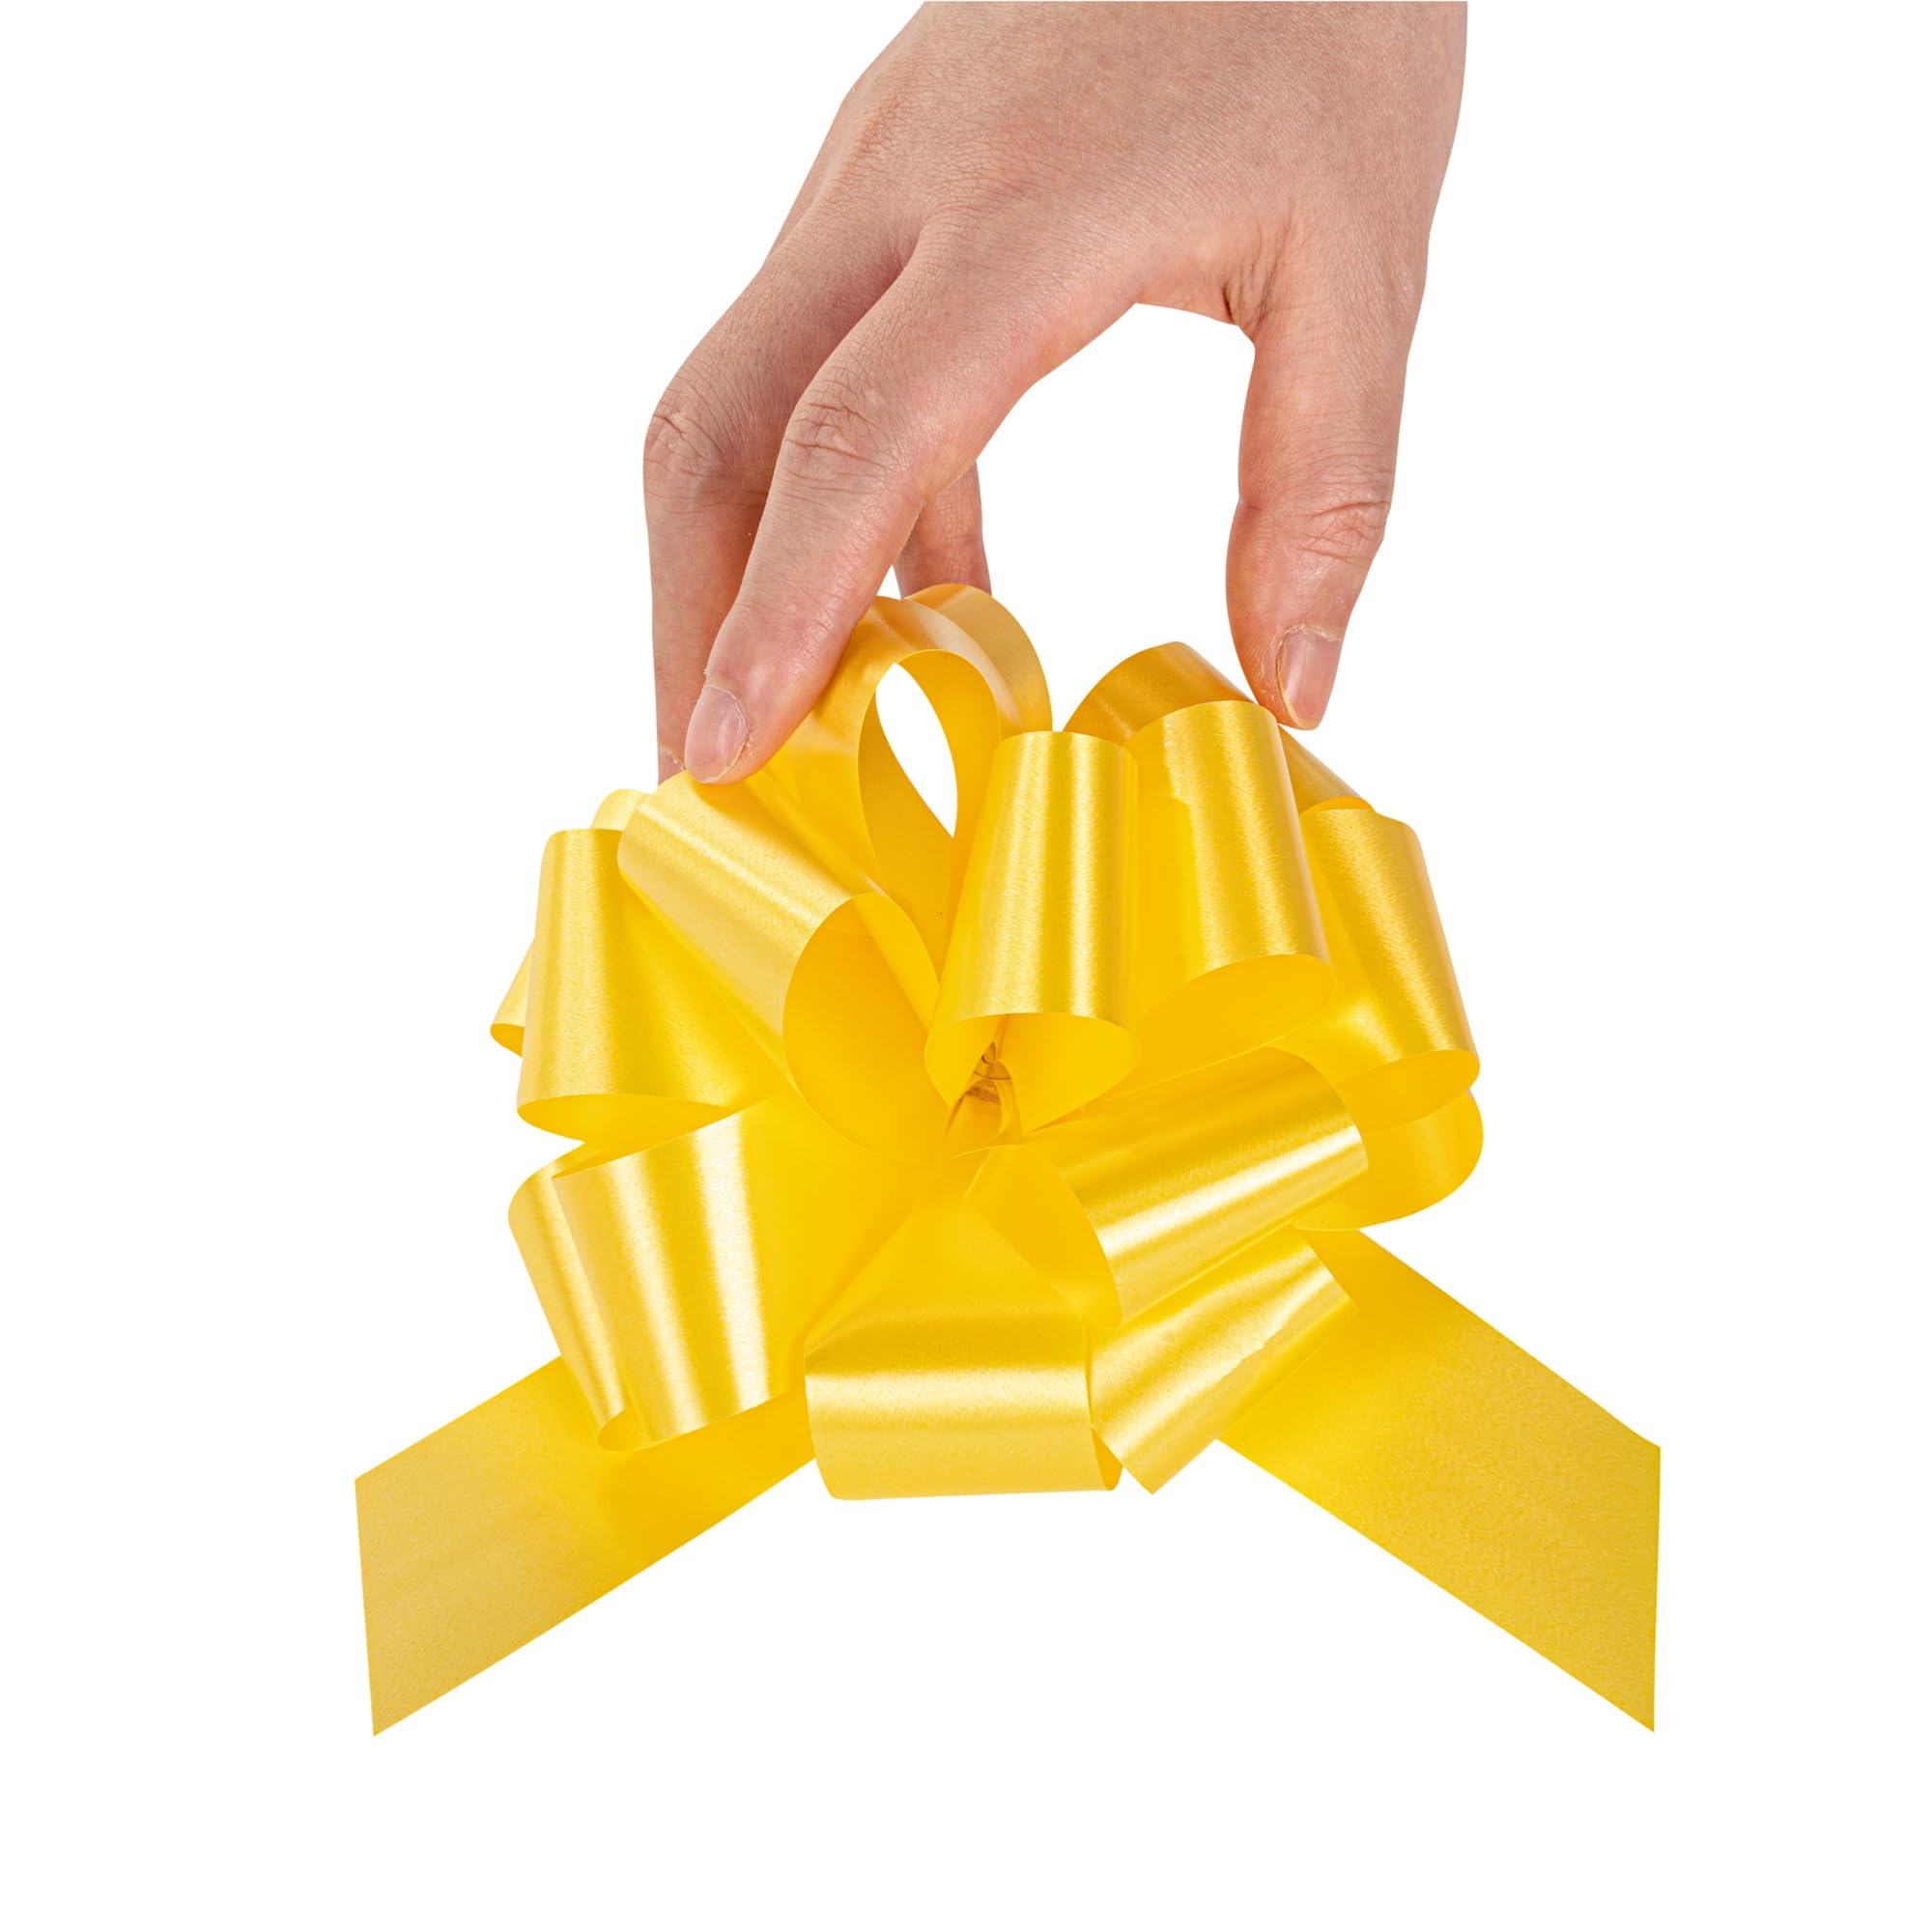 Gift Tek 5.5 Inch Ribbon Pull Bows, 1000 Satin Pull Bows - 20 Loops, Instant, Yellow Plastic Flower Bows For Gifts, Large, Solid Color, For Wedding Gift Baskets, Wraps - Restaurantware